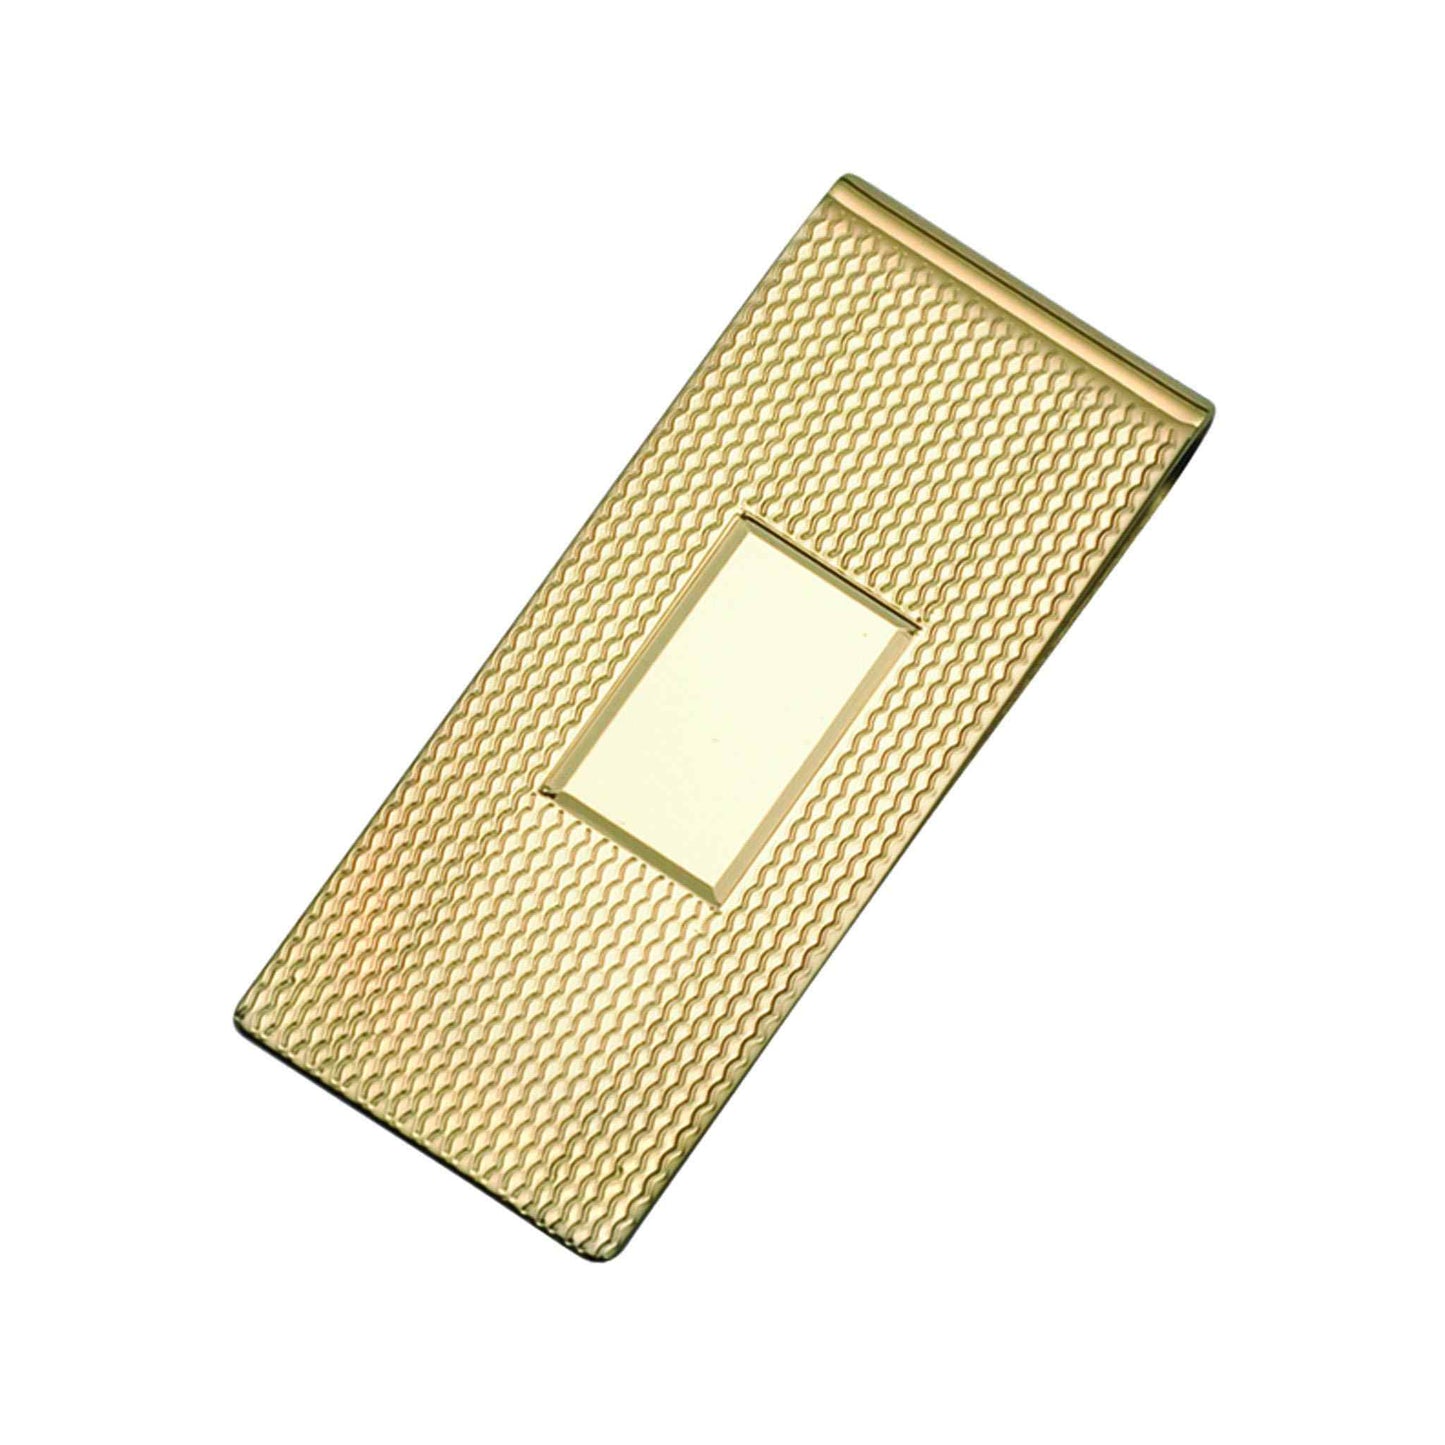 A 14k yellow gold 3/4" money clip with etched center signet displayed on a neutral white background.